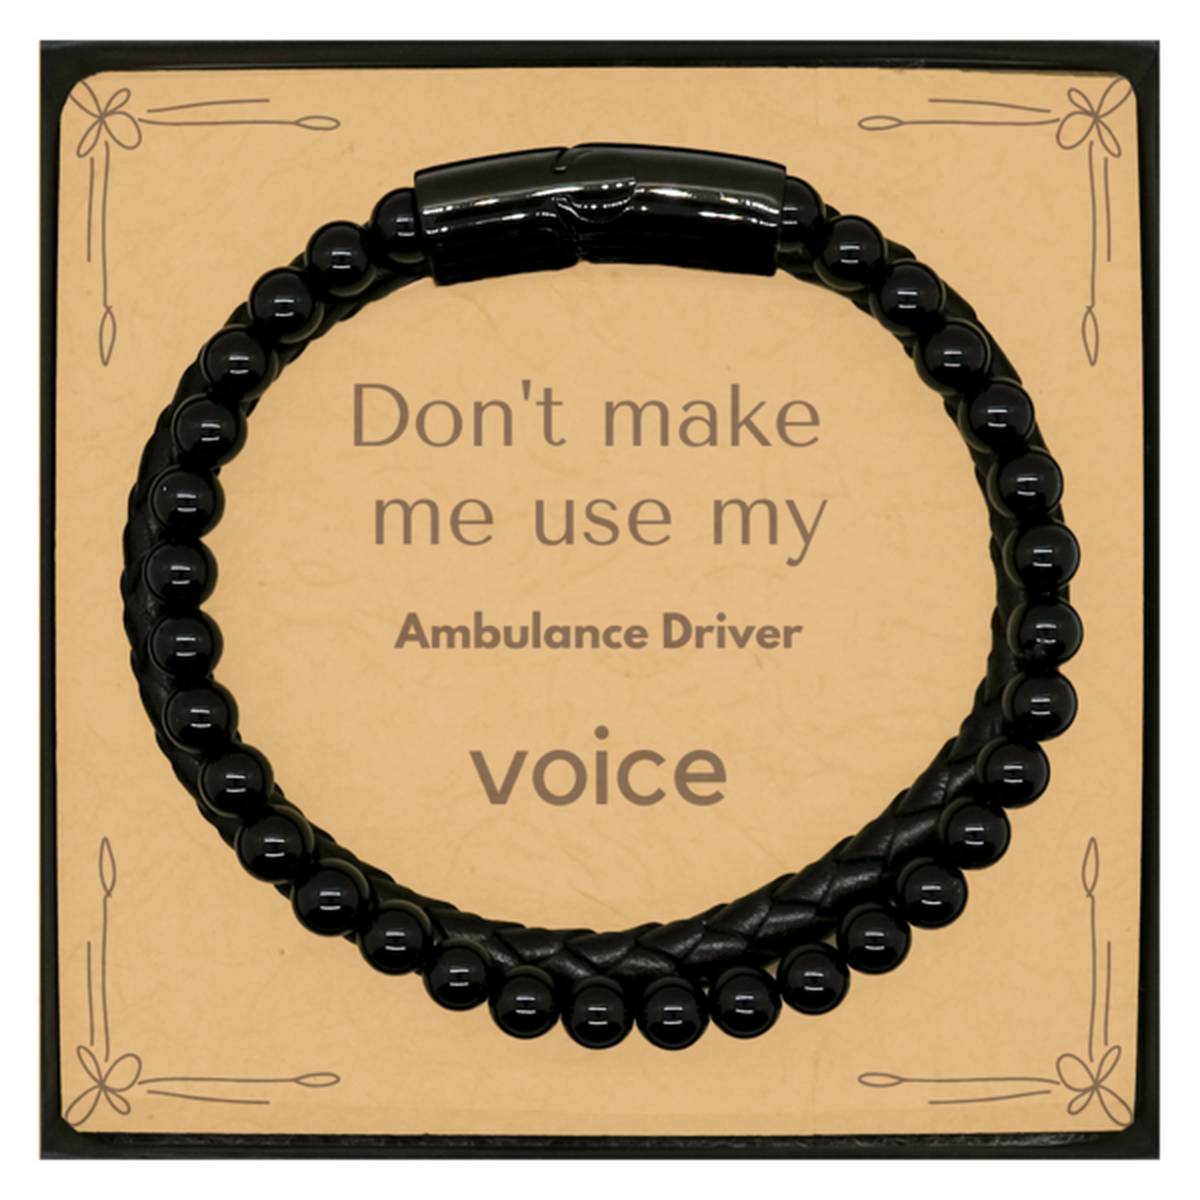 Don't make me use my Ambulance Driver voice, Sarcasm Ambulance Driver Card Gifts, Christmas Ambulance Driver Stone Leather Bracelets Birthday Unique Gifts For Ambulance Driver Coworkers, Men, Women, Colleague, Friends